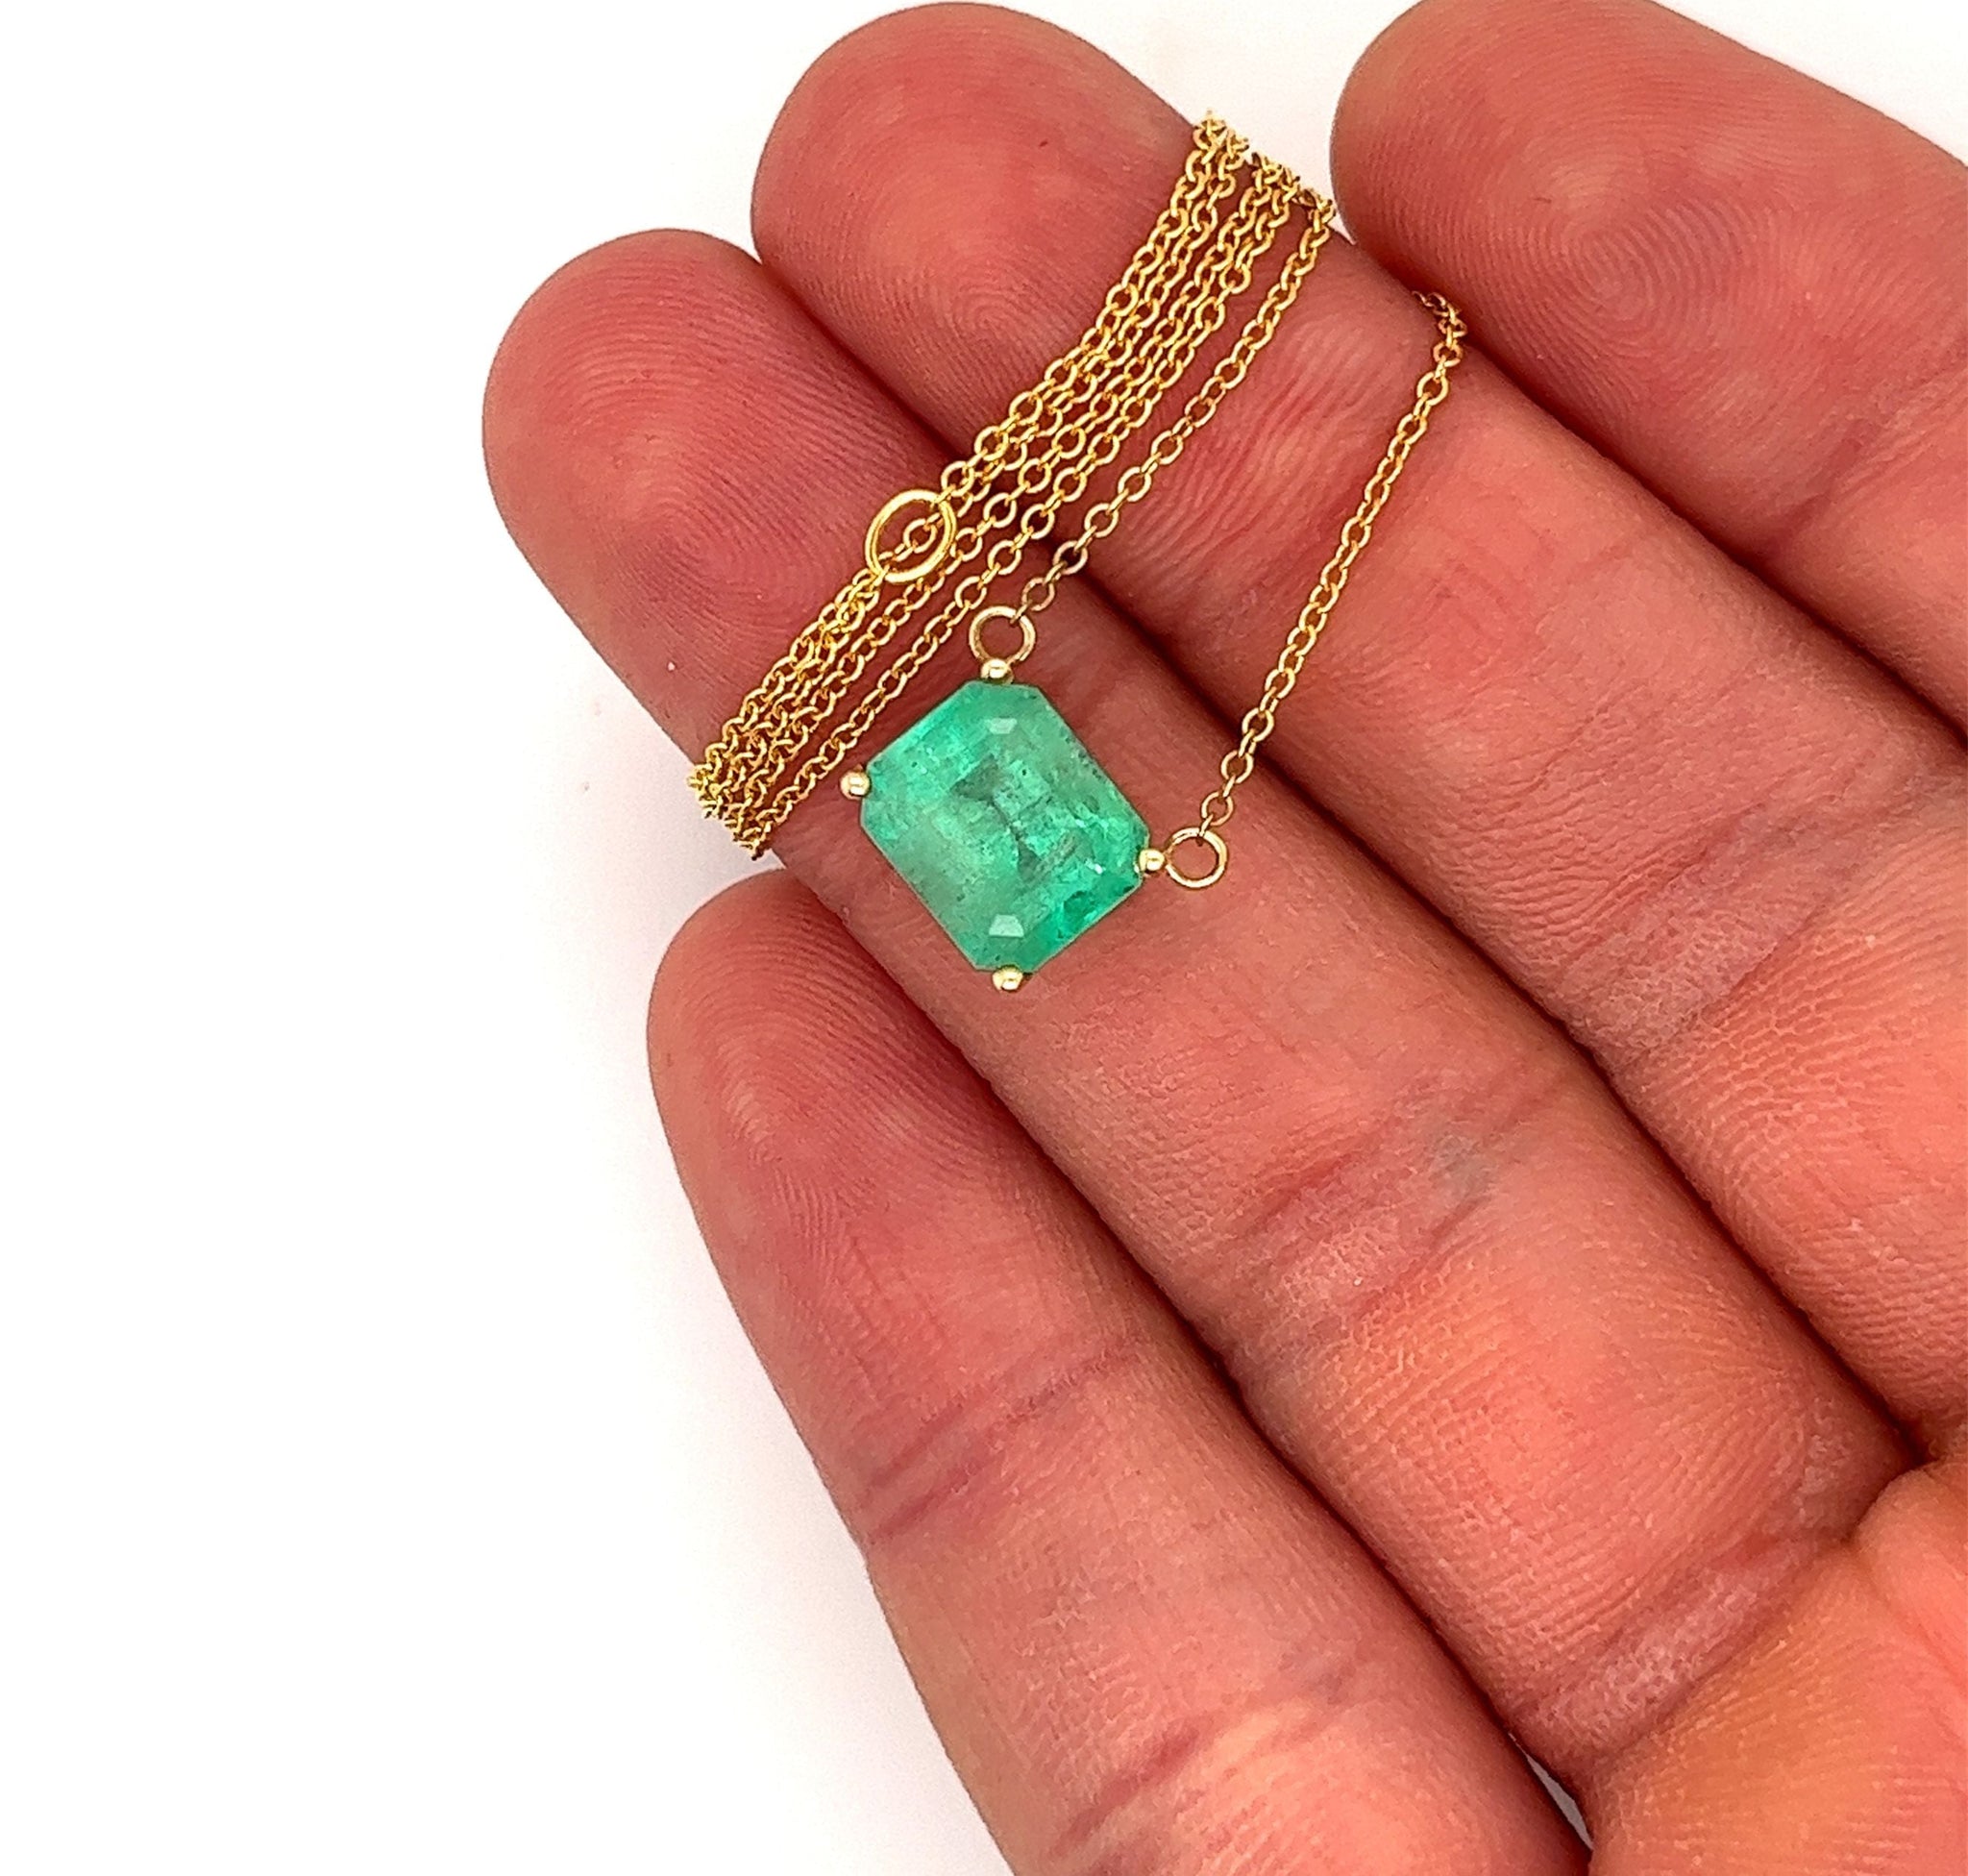 3.66 Carat Emerald Cut Colombian Emerald Solitaire East West Pendant Necklace in 14K Yellow Gold